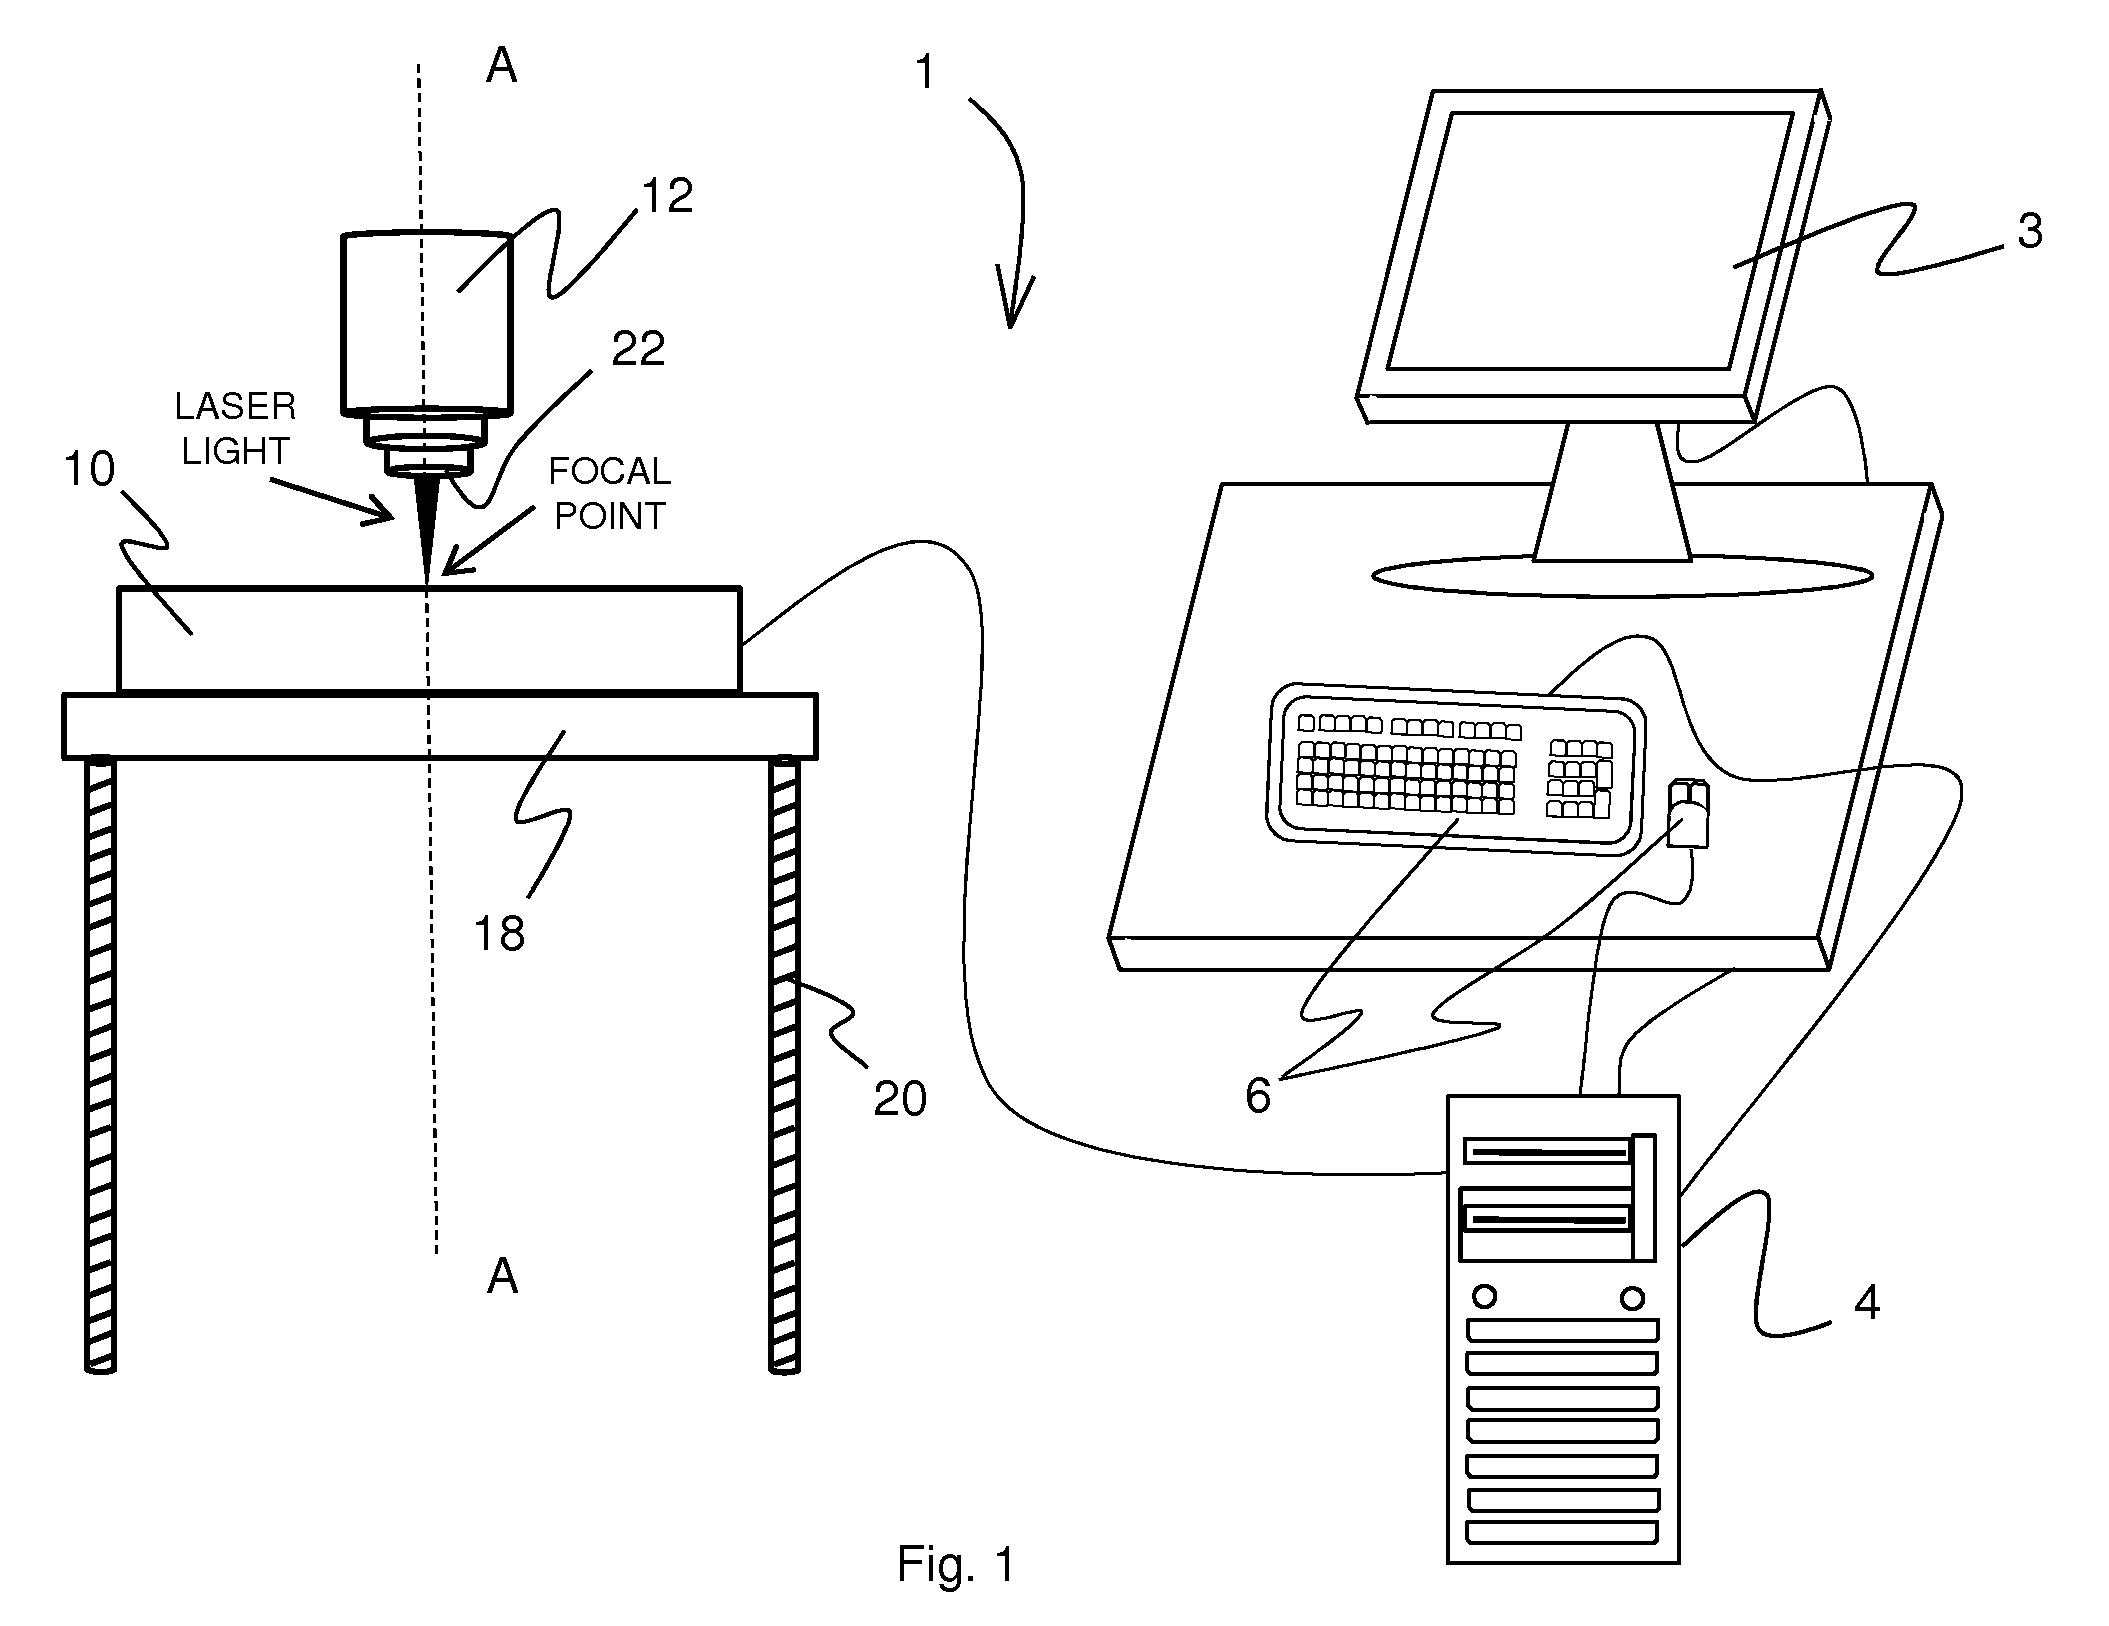 Method and apparatus for fabricating a foam container with a computer controlled laser cutting device